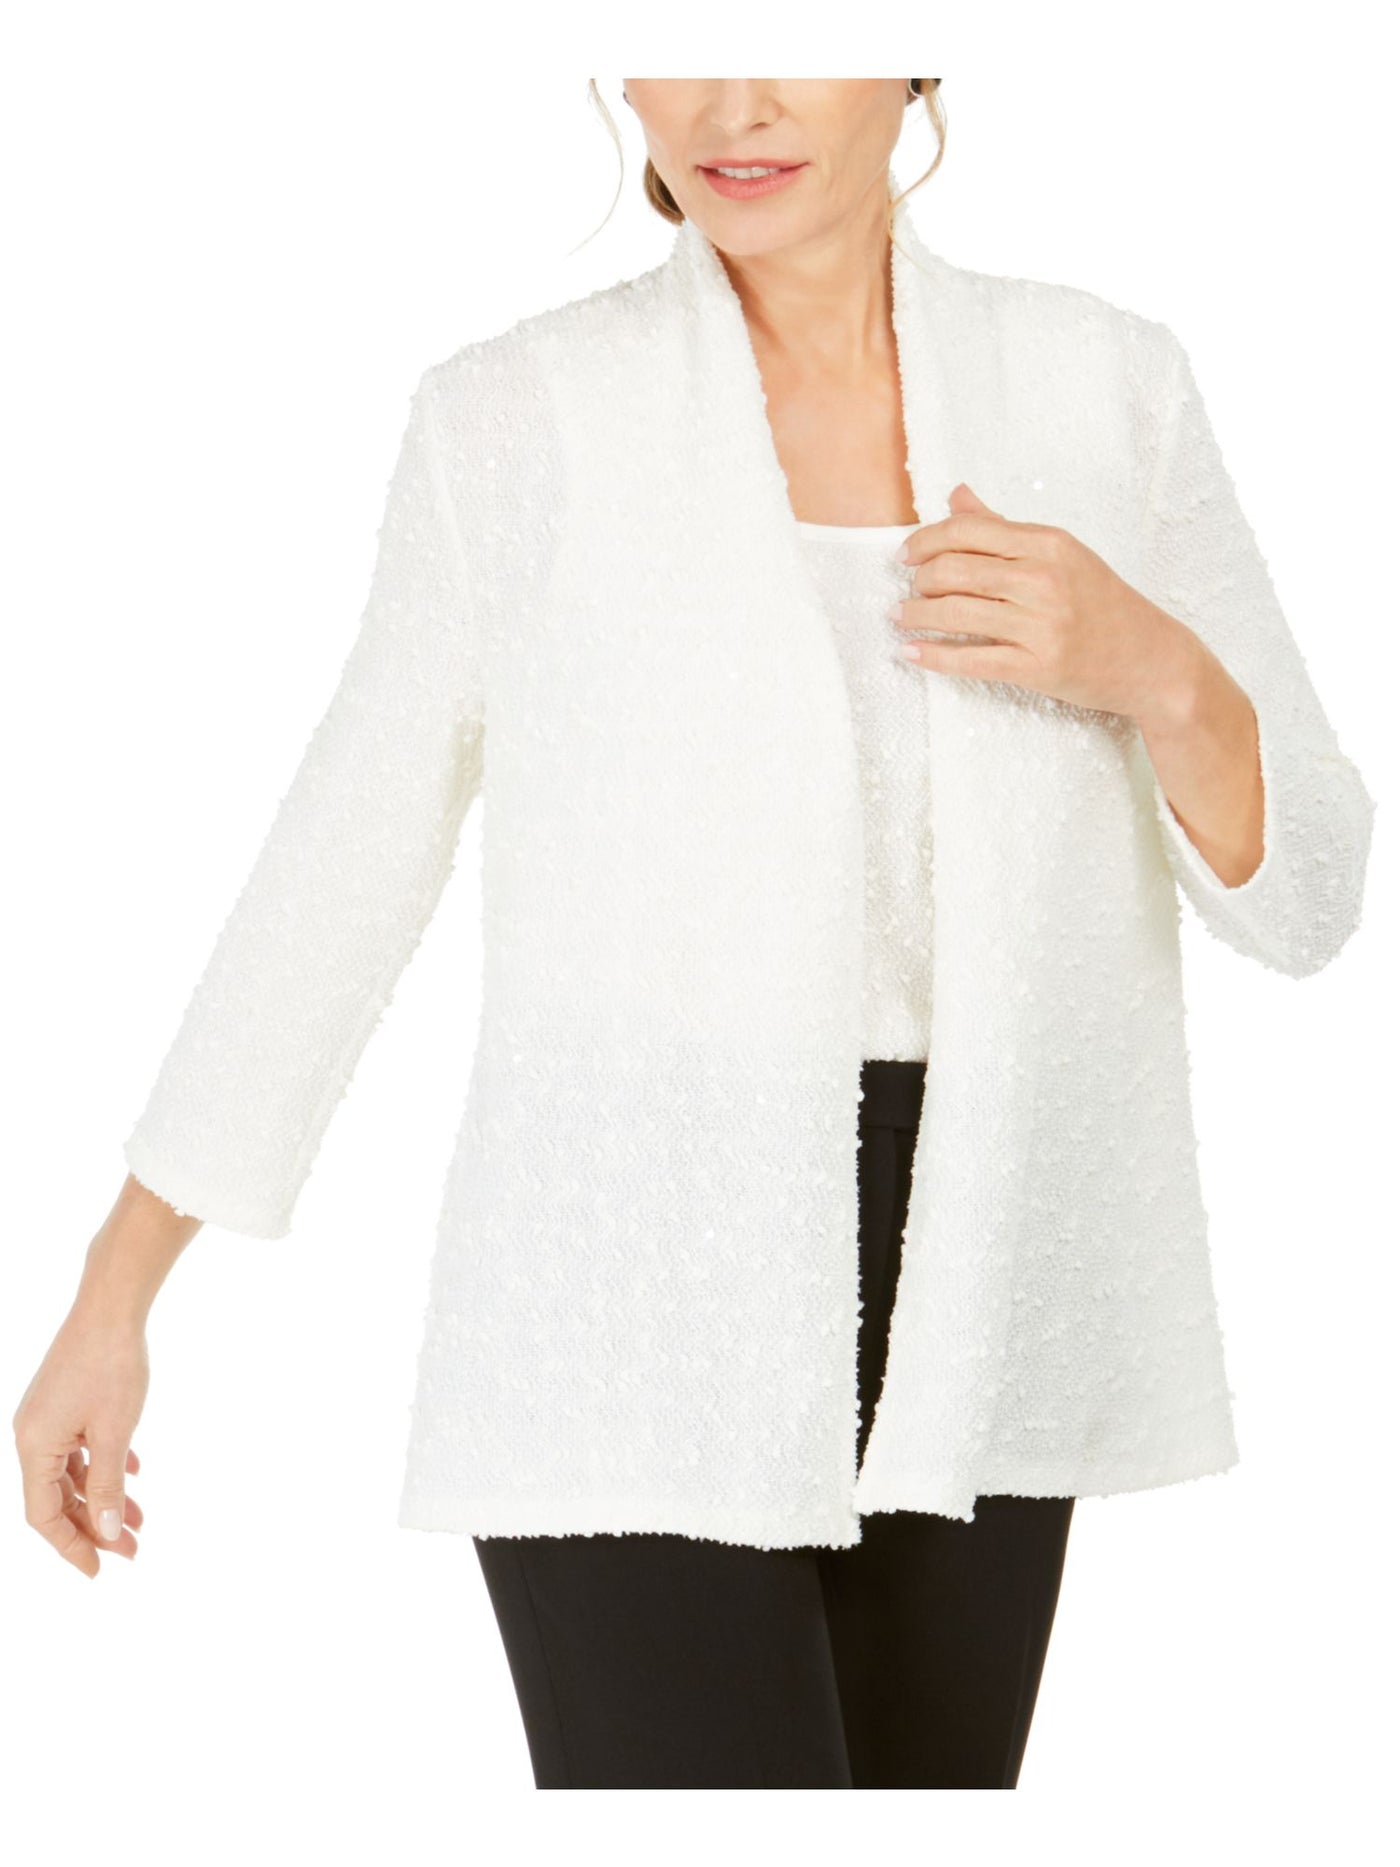 KASPER Womens Ivory Embroidered Textured 3/4 Sleeve Open Cardigan Evening Cardigan Petites PS